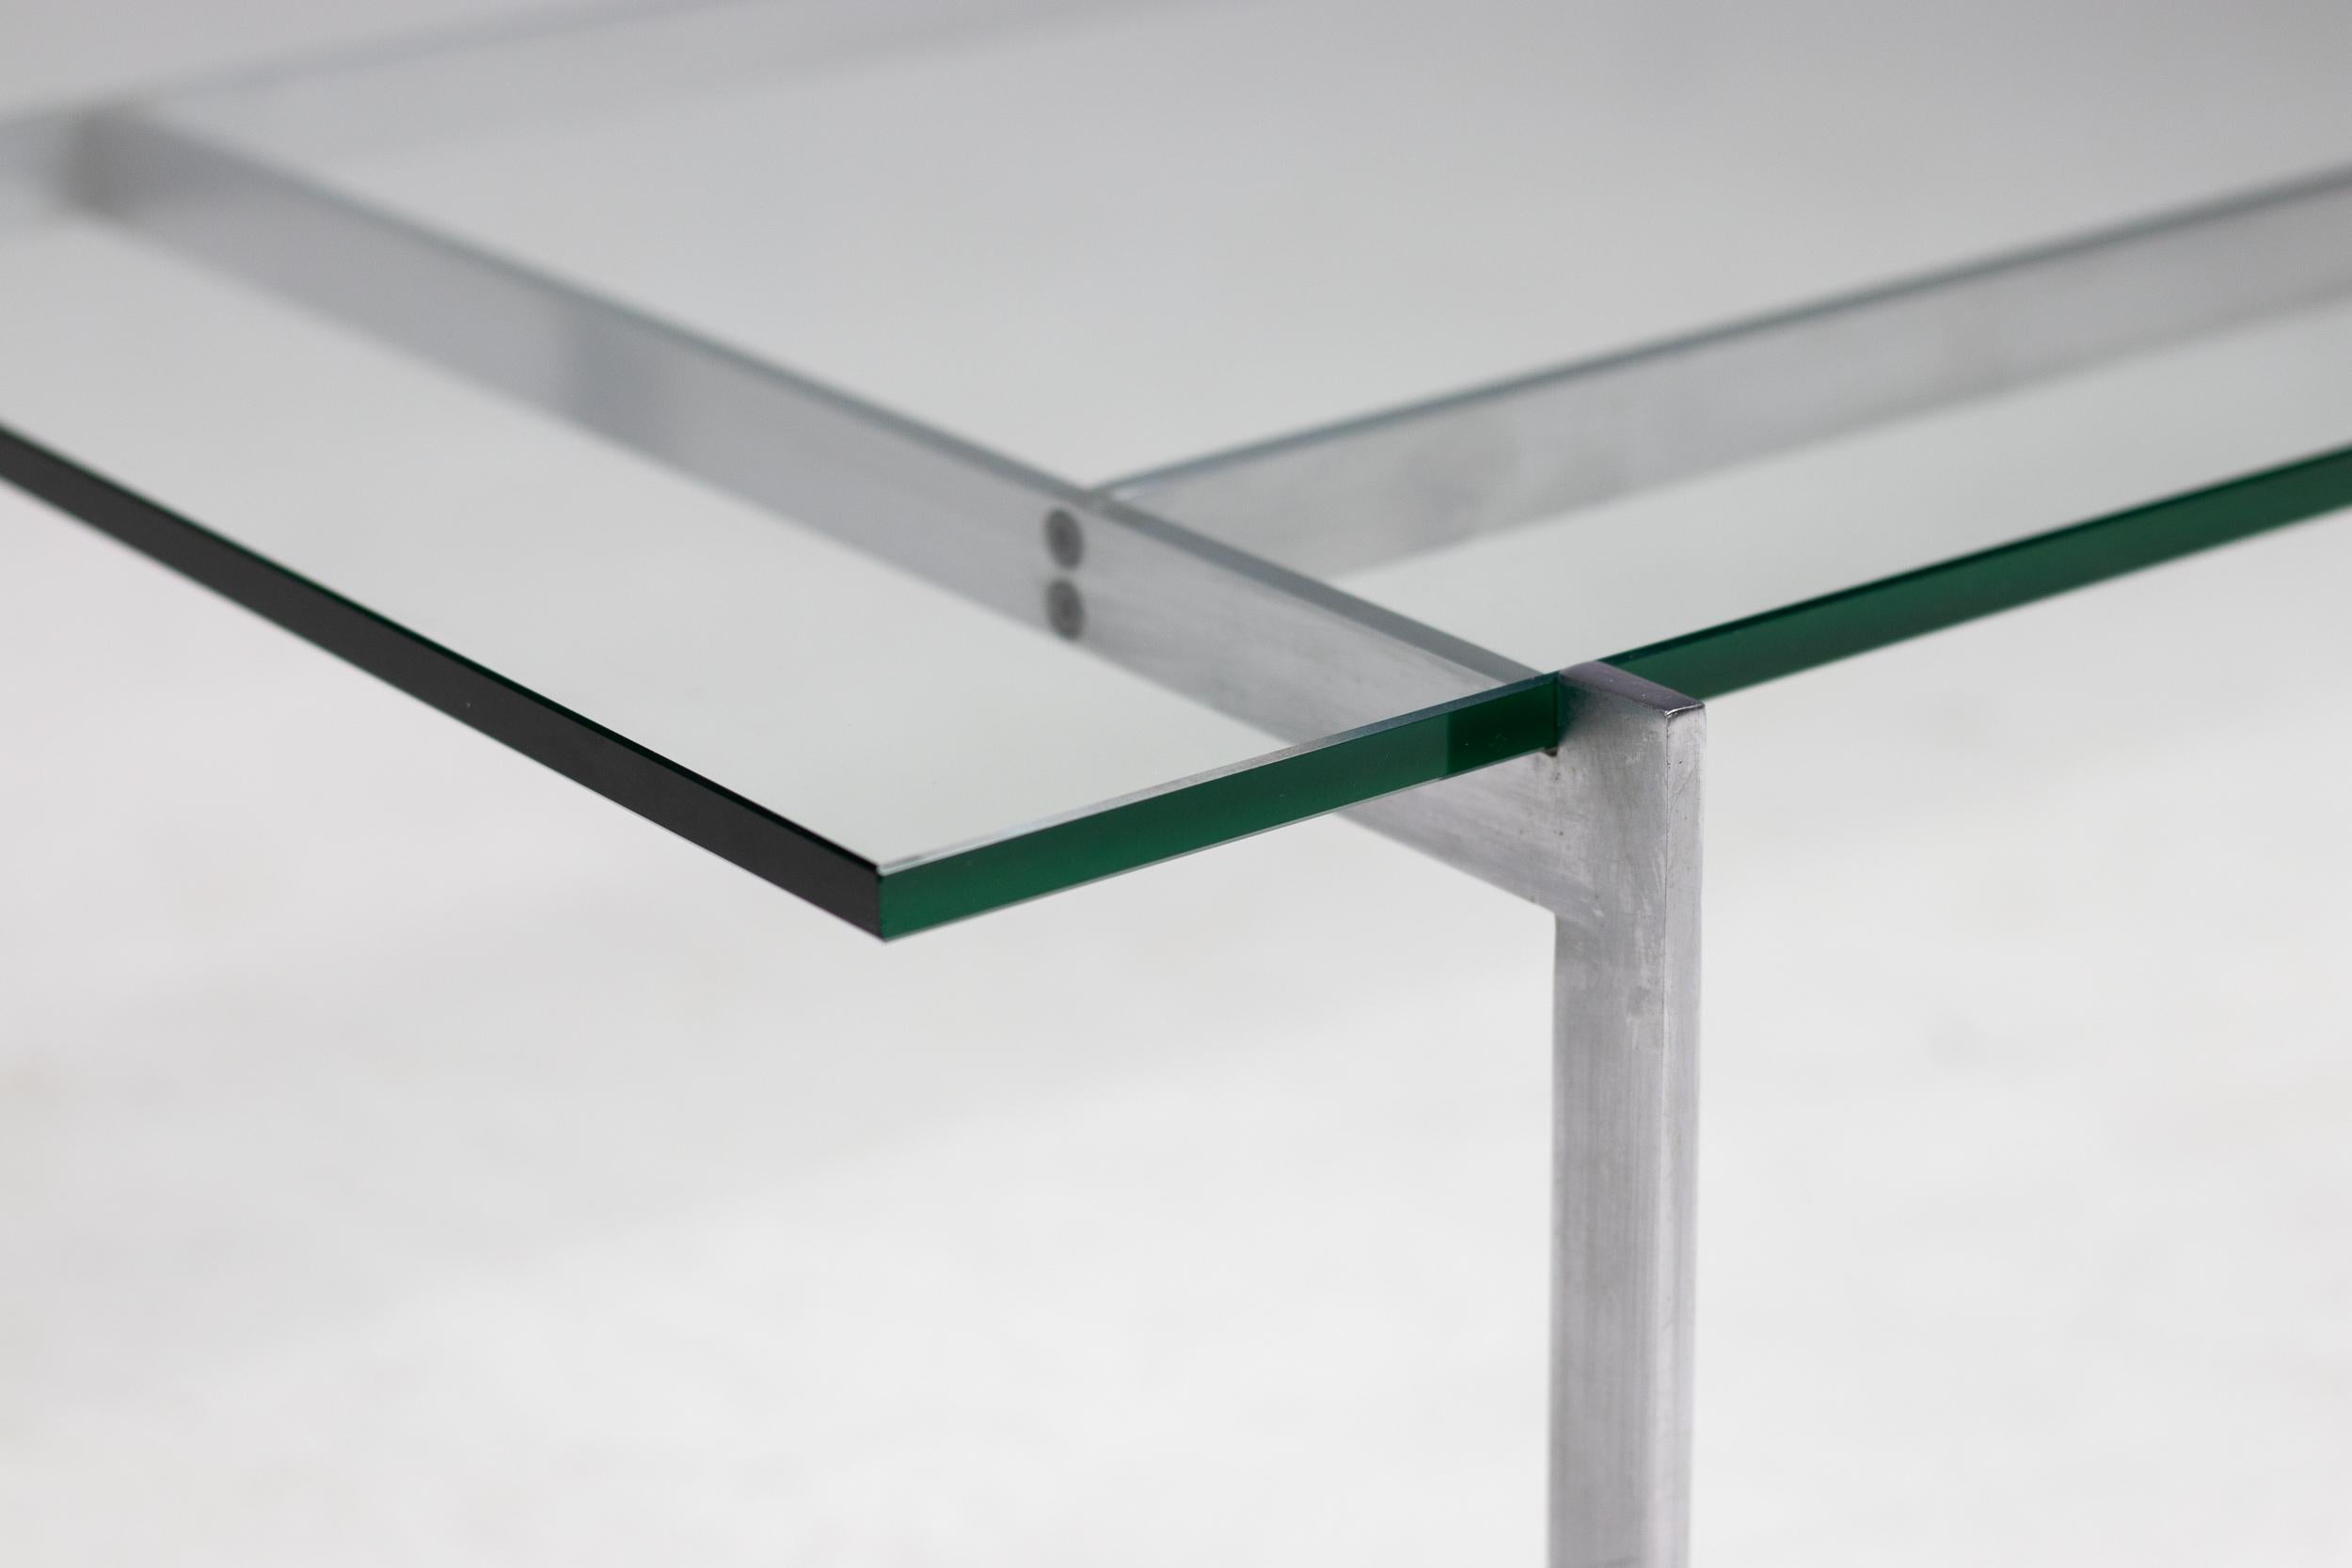 This table is the epitome of minimalistic yet monumental design. The 'swastika' shaped matte chrome steel frame holds a glass top. With this table the designer was able to get the architectural core in his design. 
The table, by means of the steel